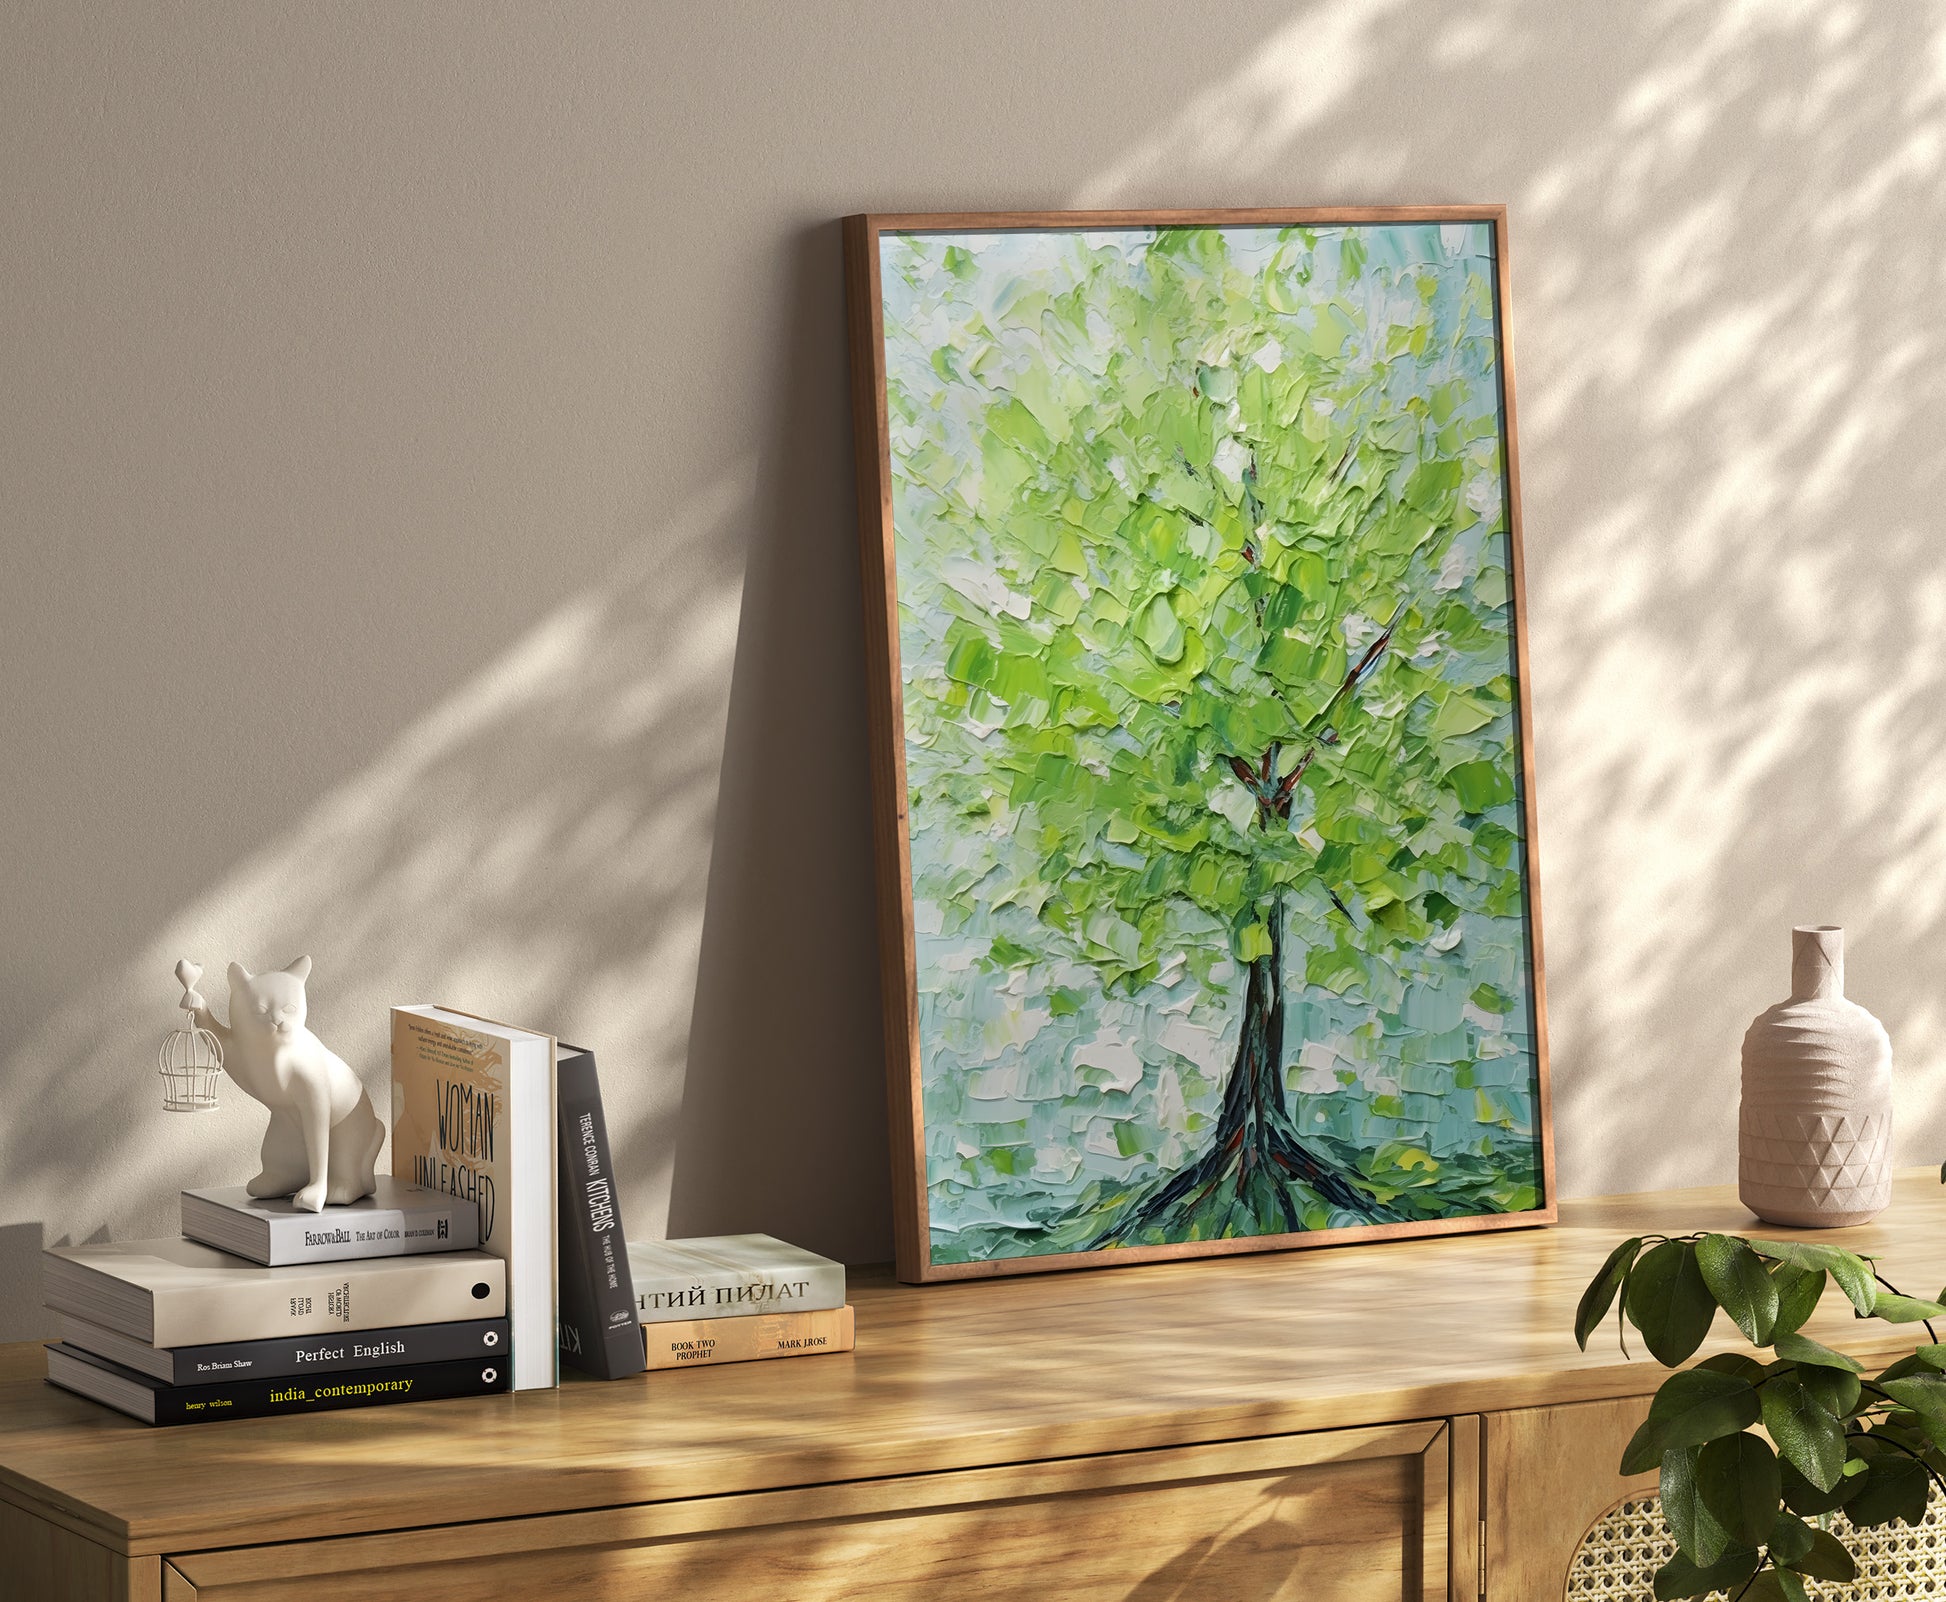 A vibrant tree painting on a wall above a shelf with books and decorative items.